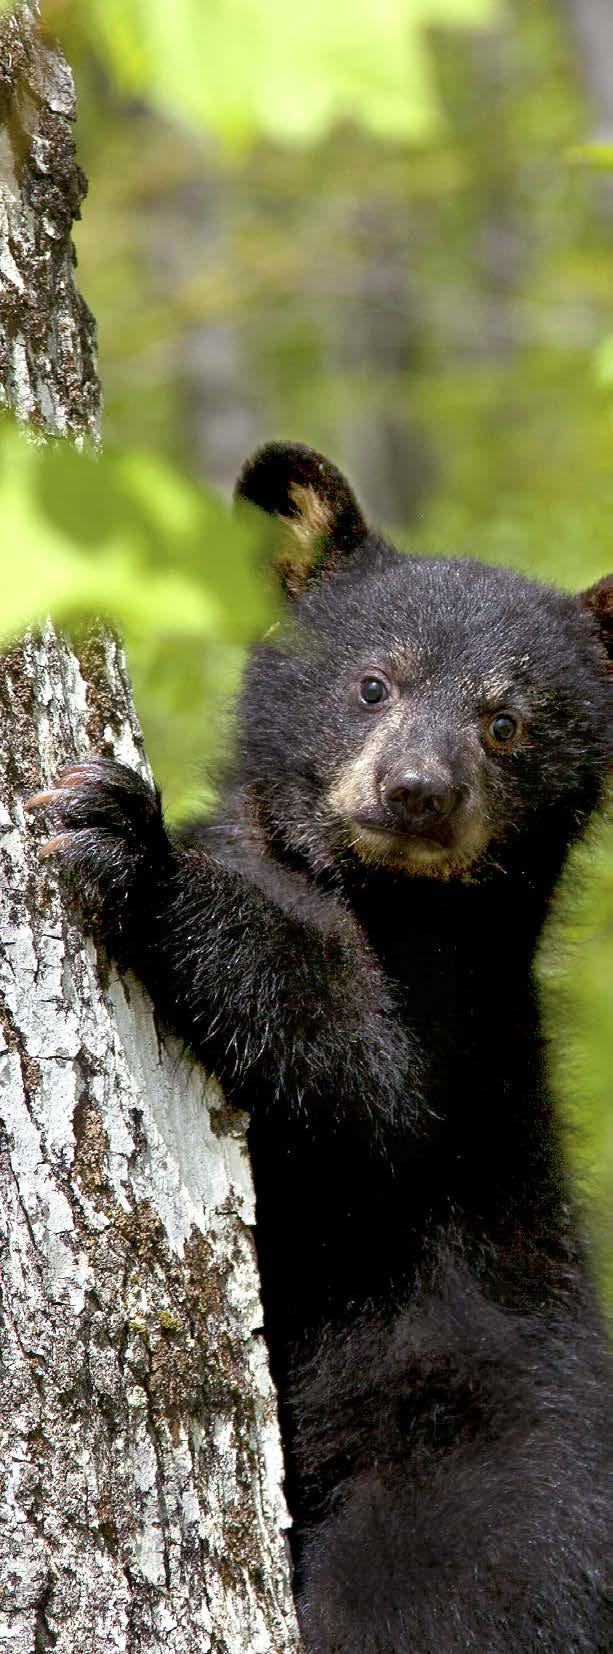 RS Rehabilitation and research offer insights into bear behavior by Benjamin Kilham Black bear cubs weigh less than a pound when they are born in the dead of winter.